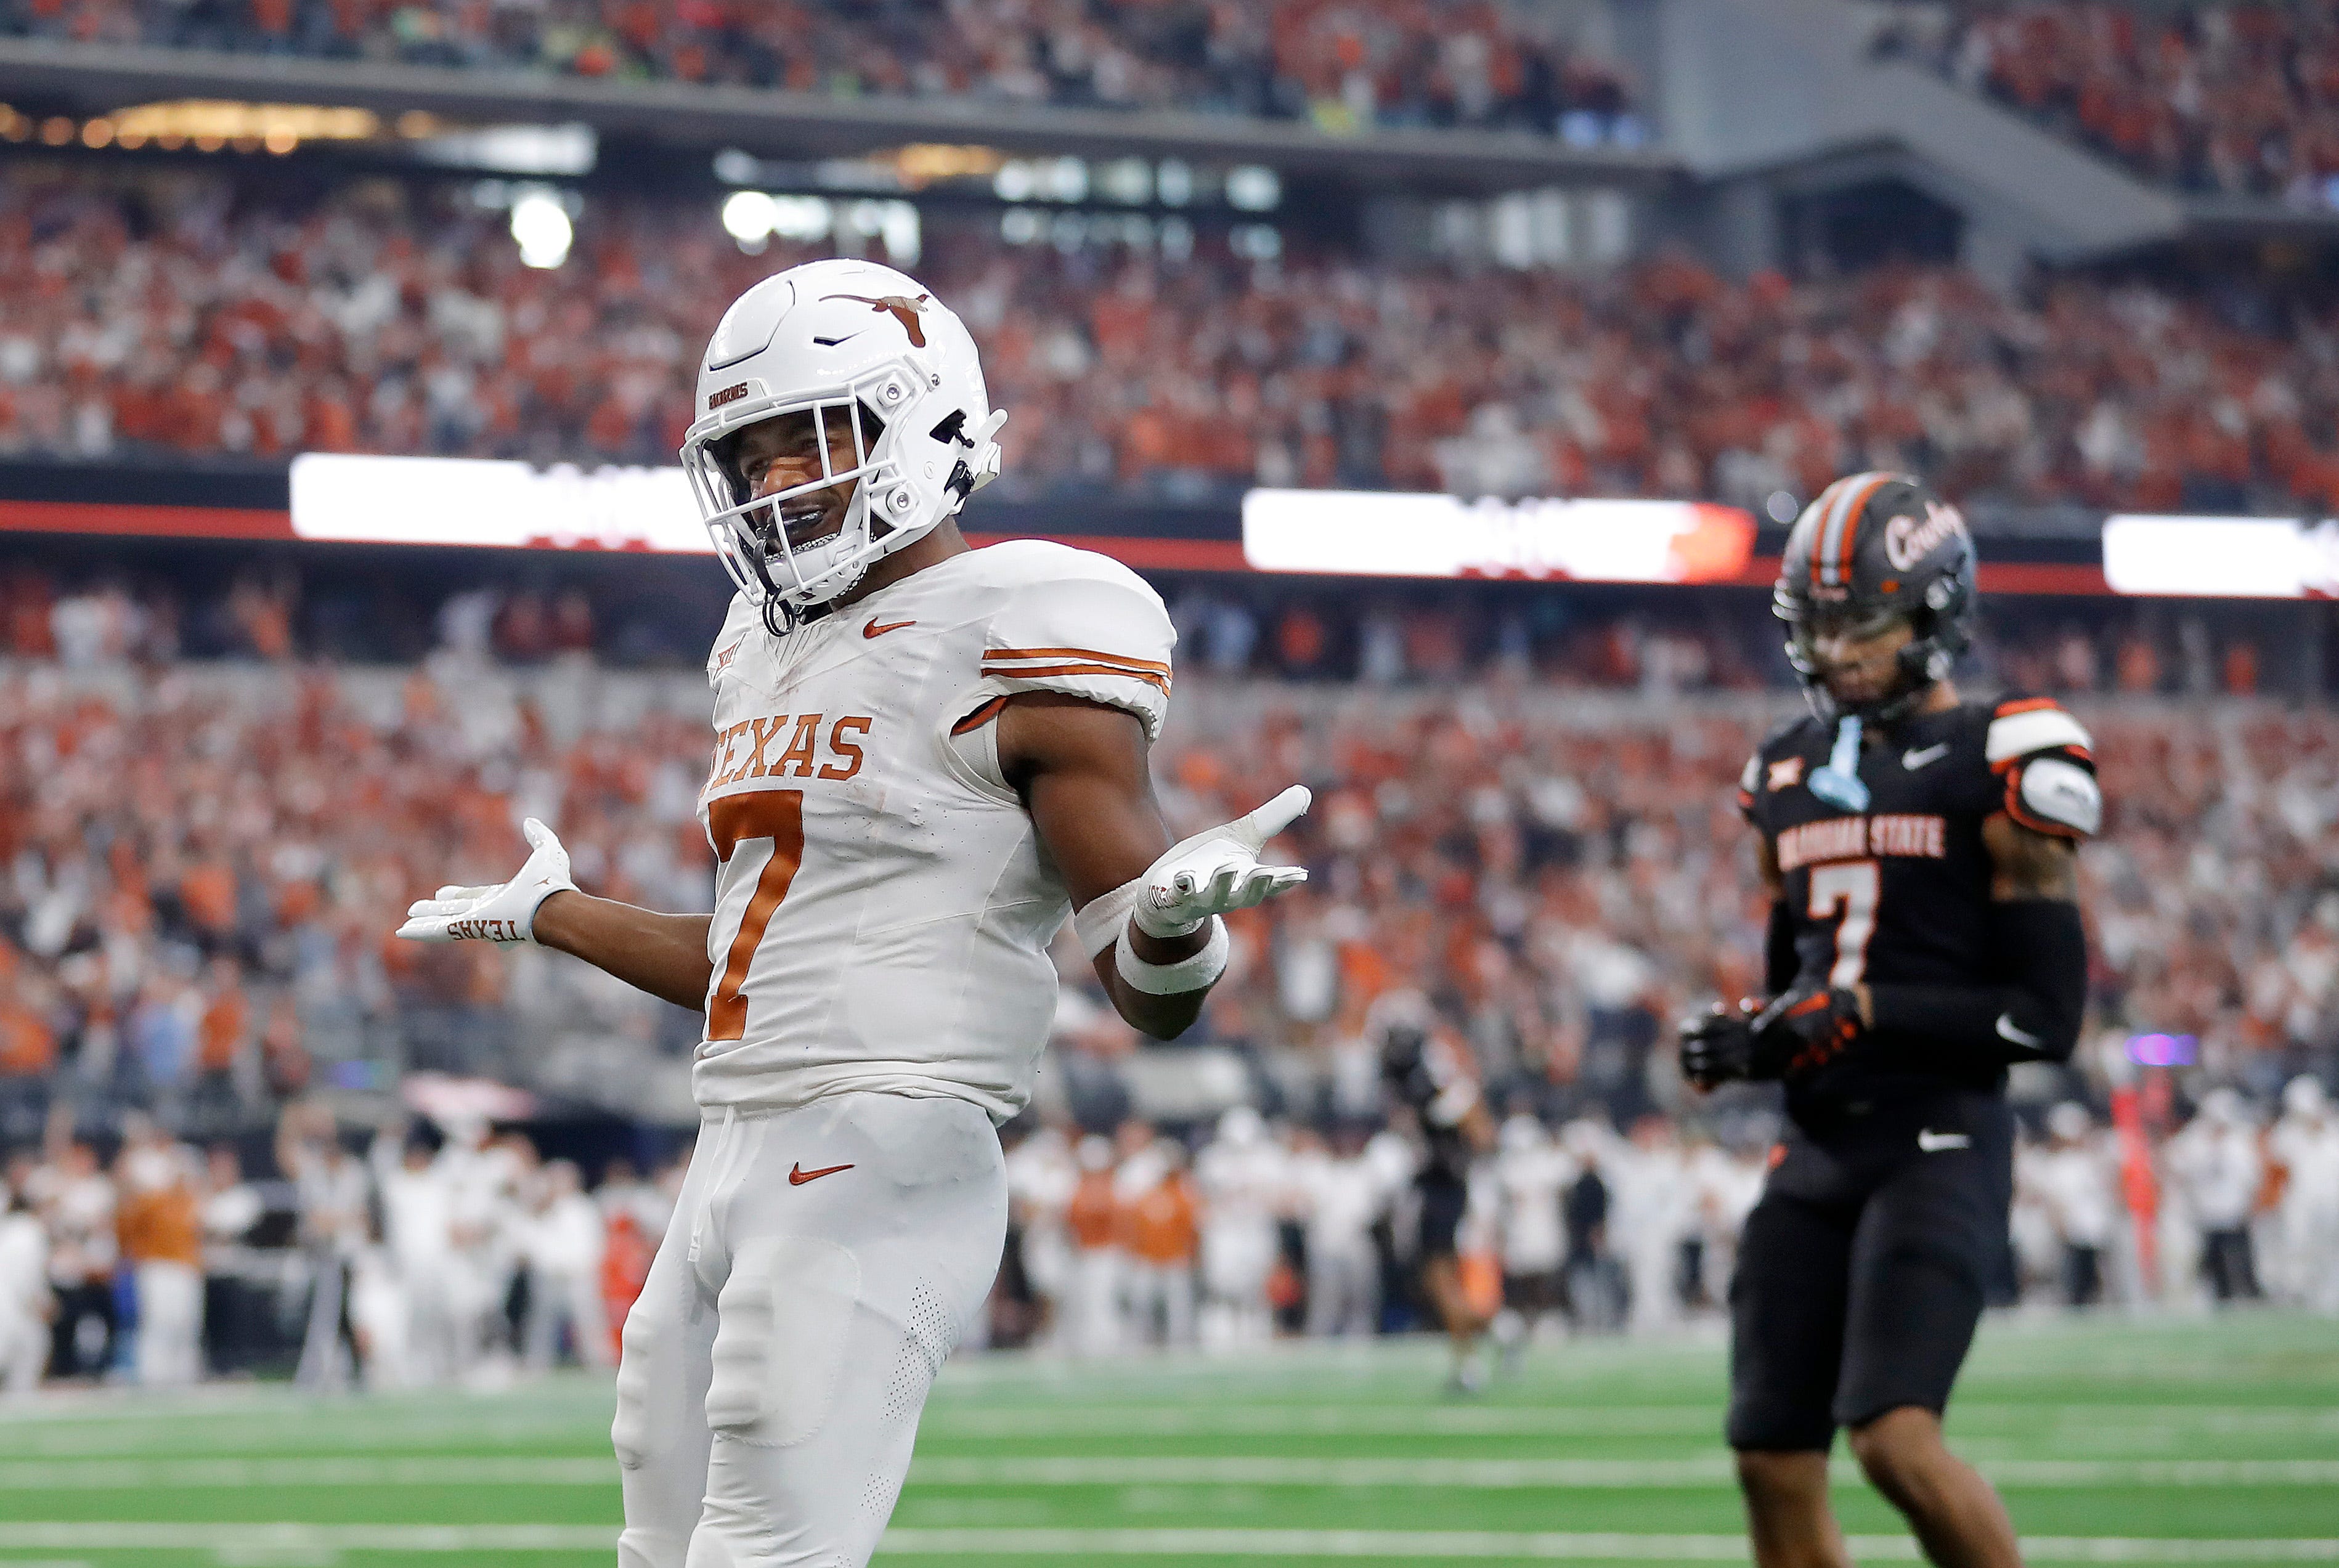 Texas RB Keilan Robinson scored two touchdowns against the Cowboys on Saturday